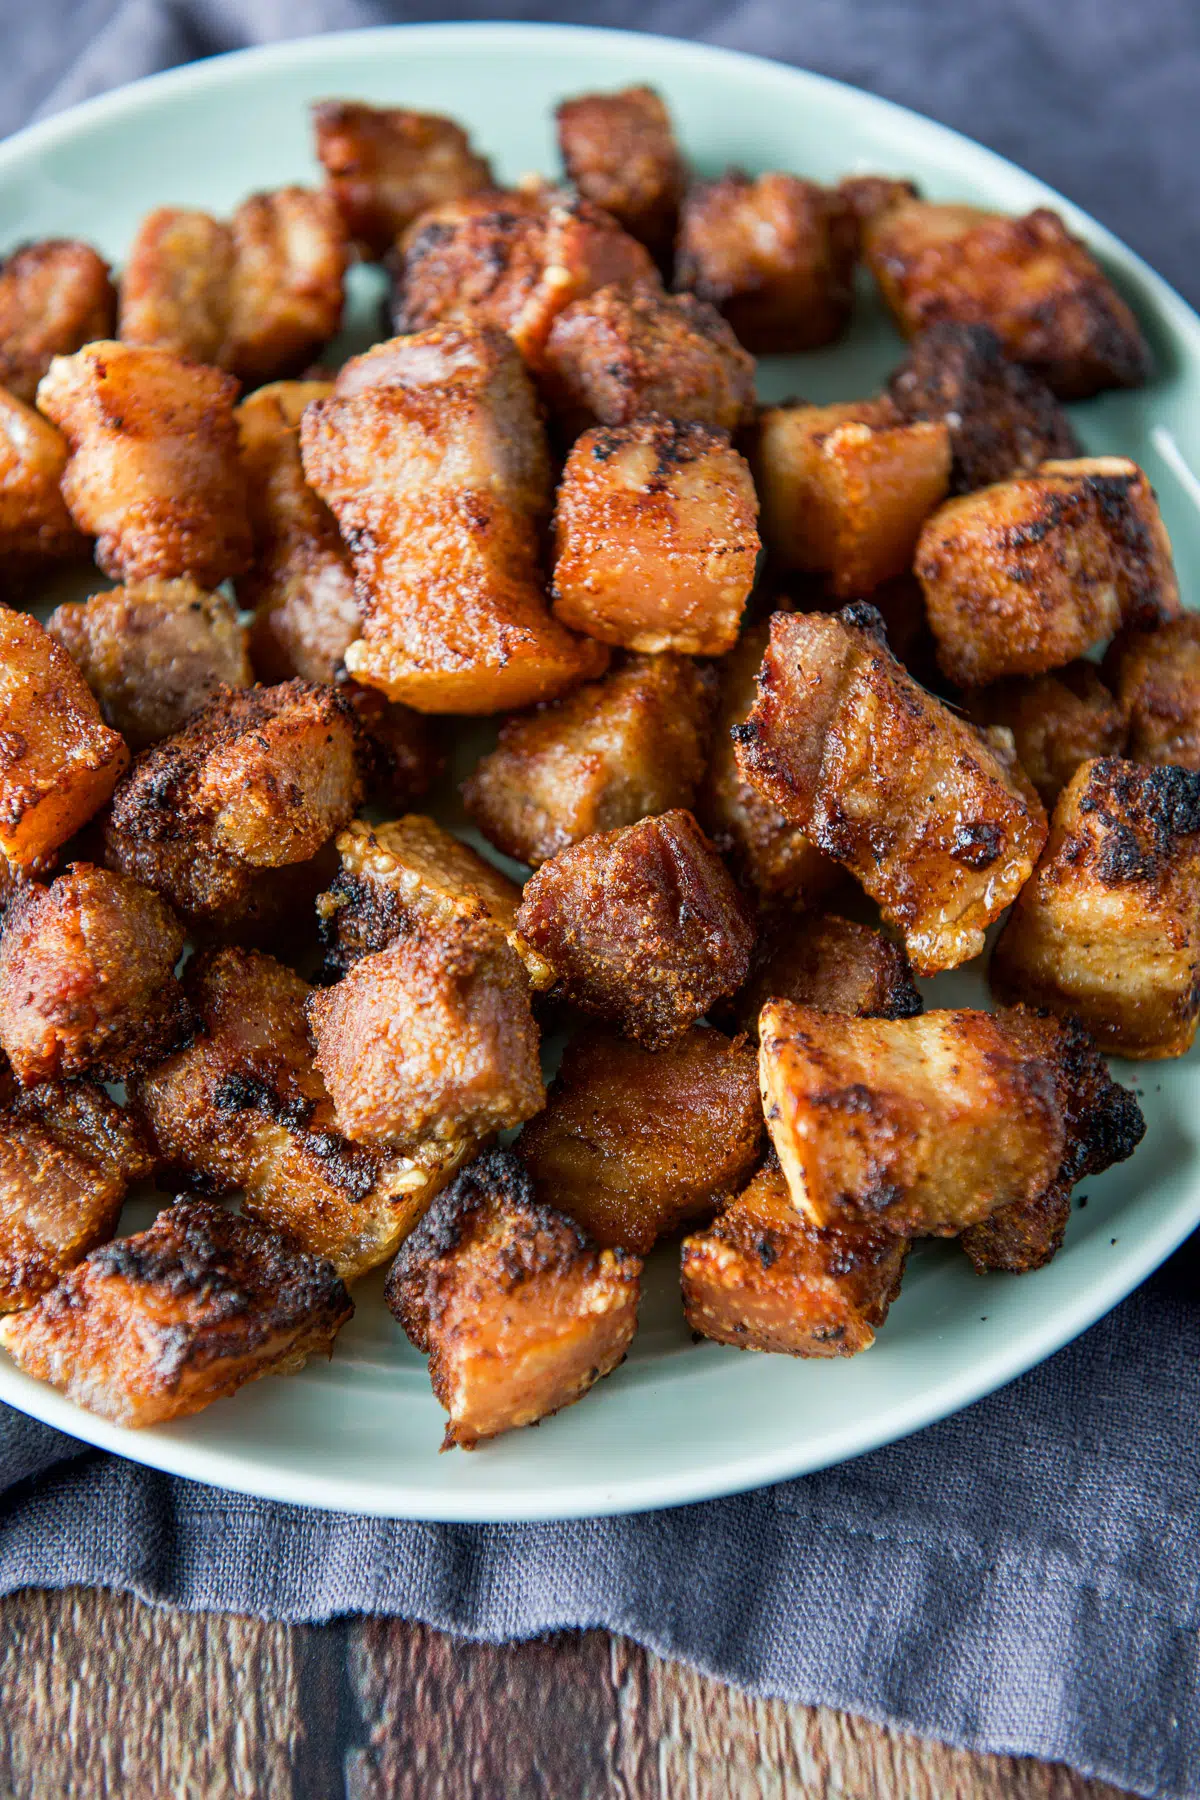 Pork belly bites in a pile on a plate